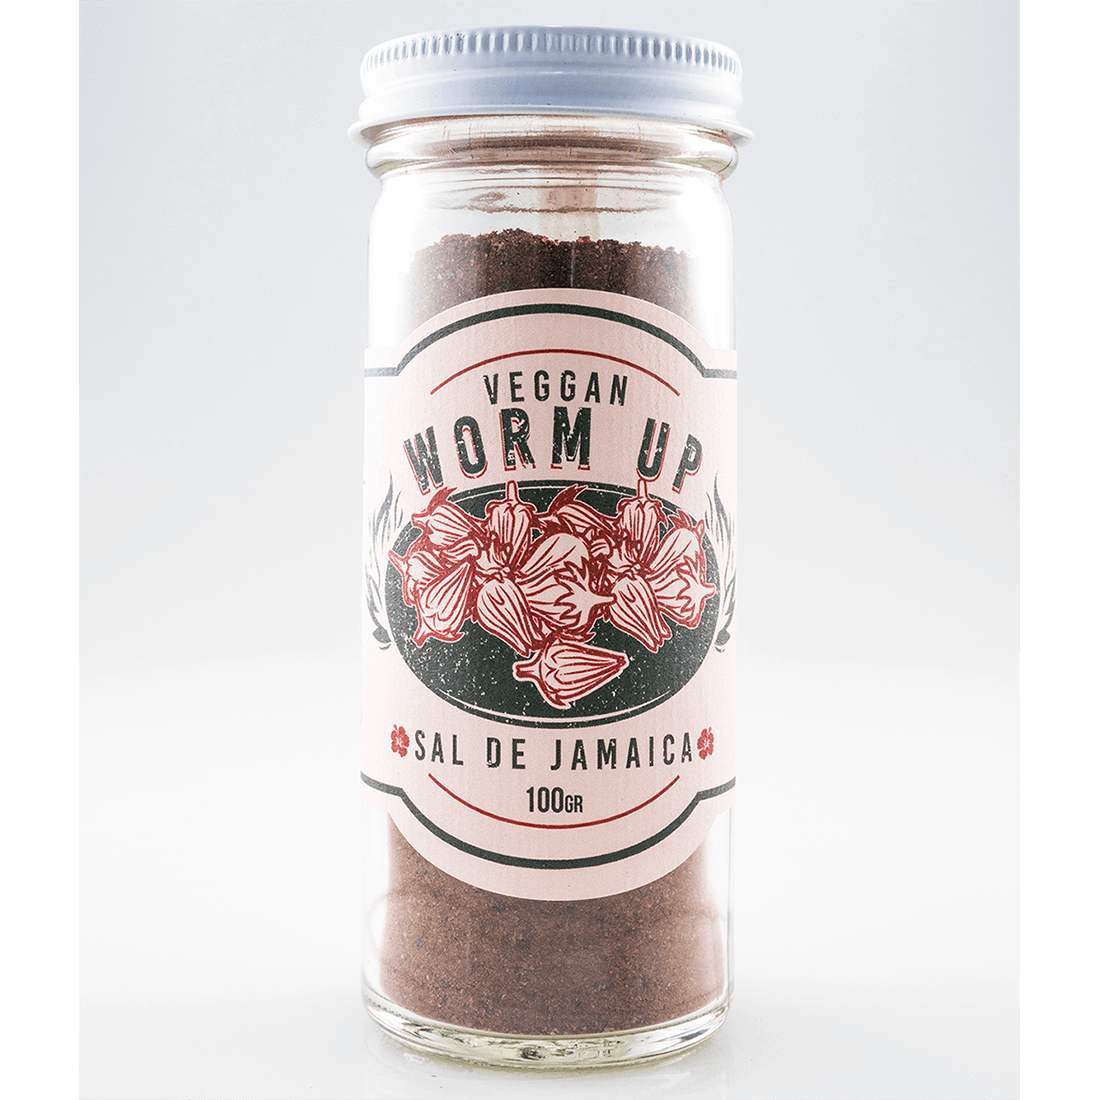 Product image for “Worm Up Vegan Hibiscus Chipotle Salt”